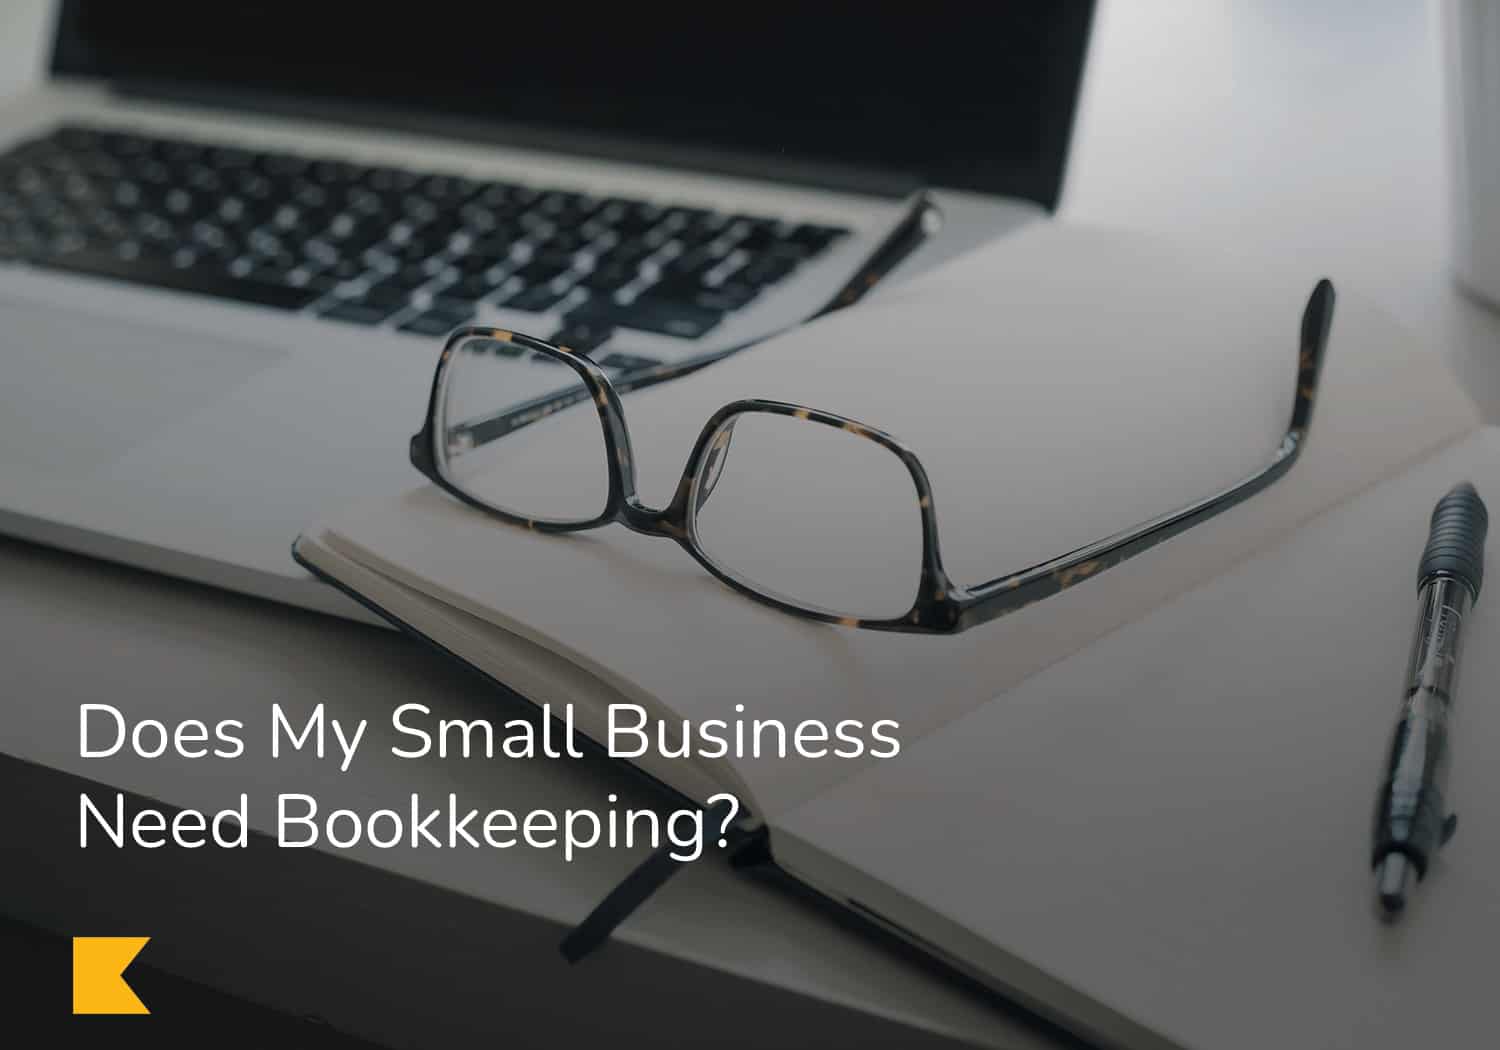 Does My Small Business Need Bookkeeping?